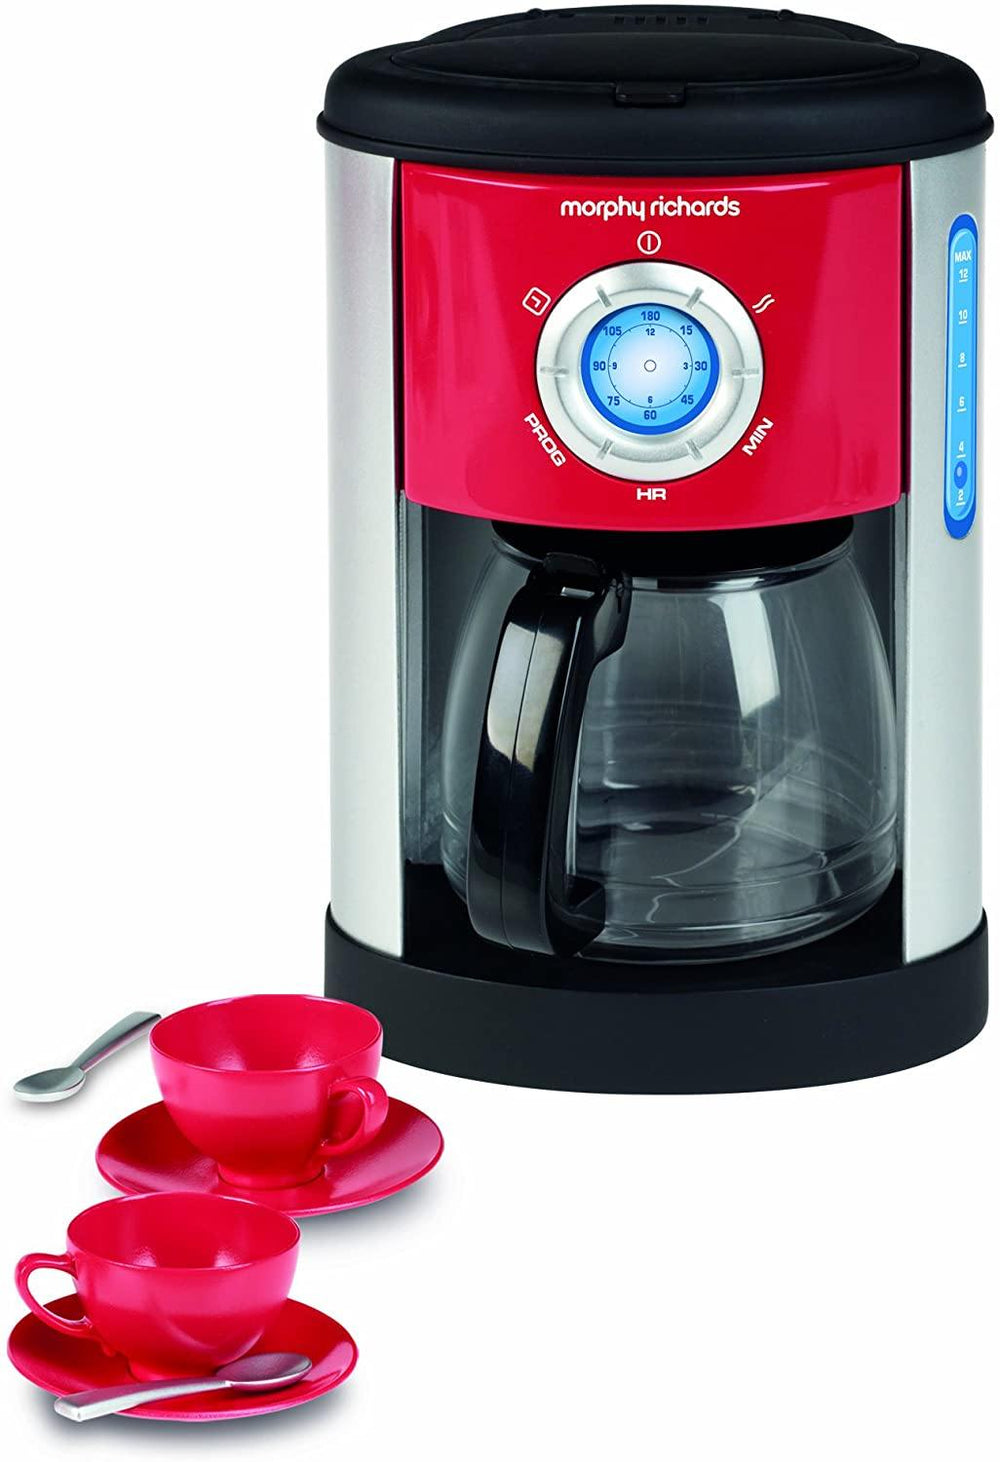 Casdon Morphy Richards Coffee Maker and Cups-red - Yachew